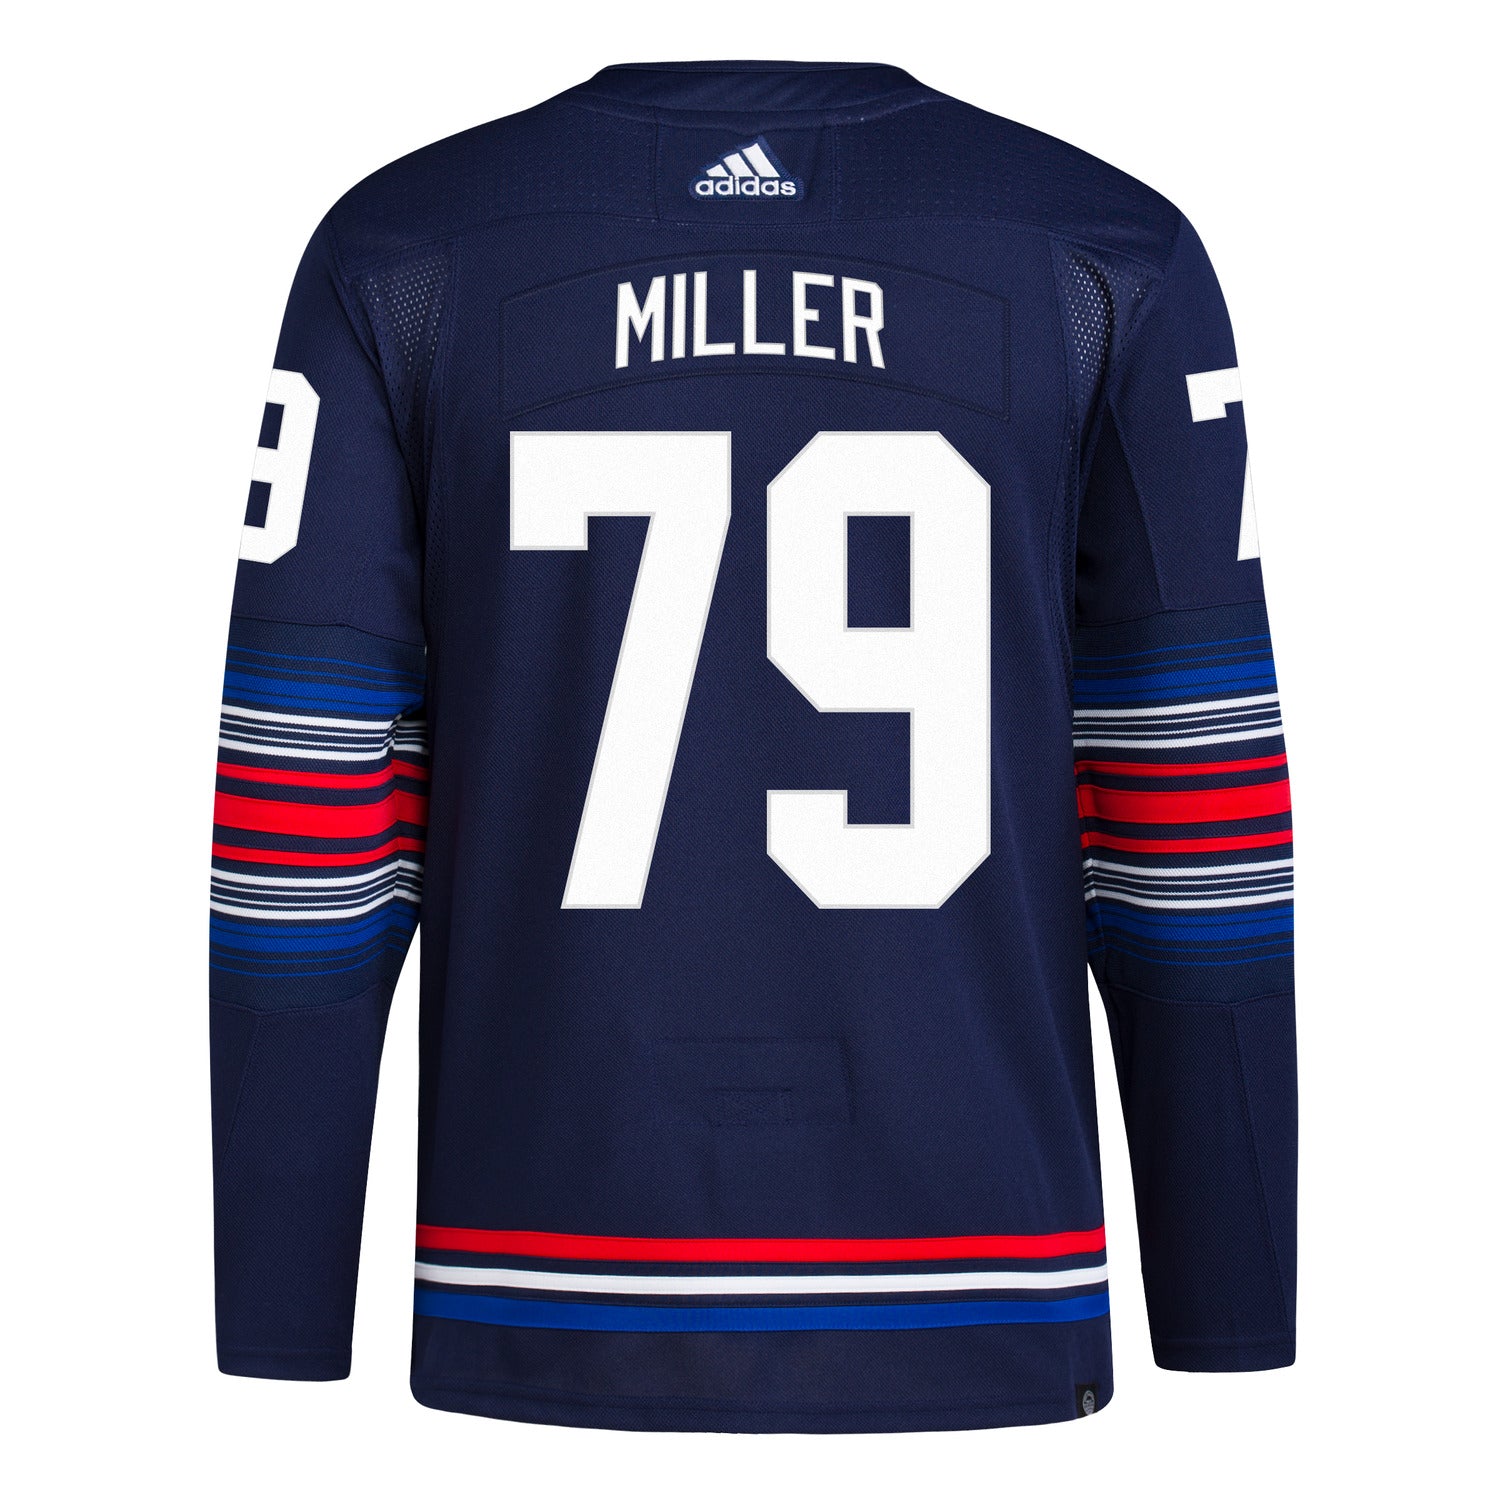 K'Andre Miller Adidas Authentic Third Jersey - Back View